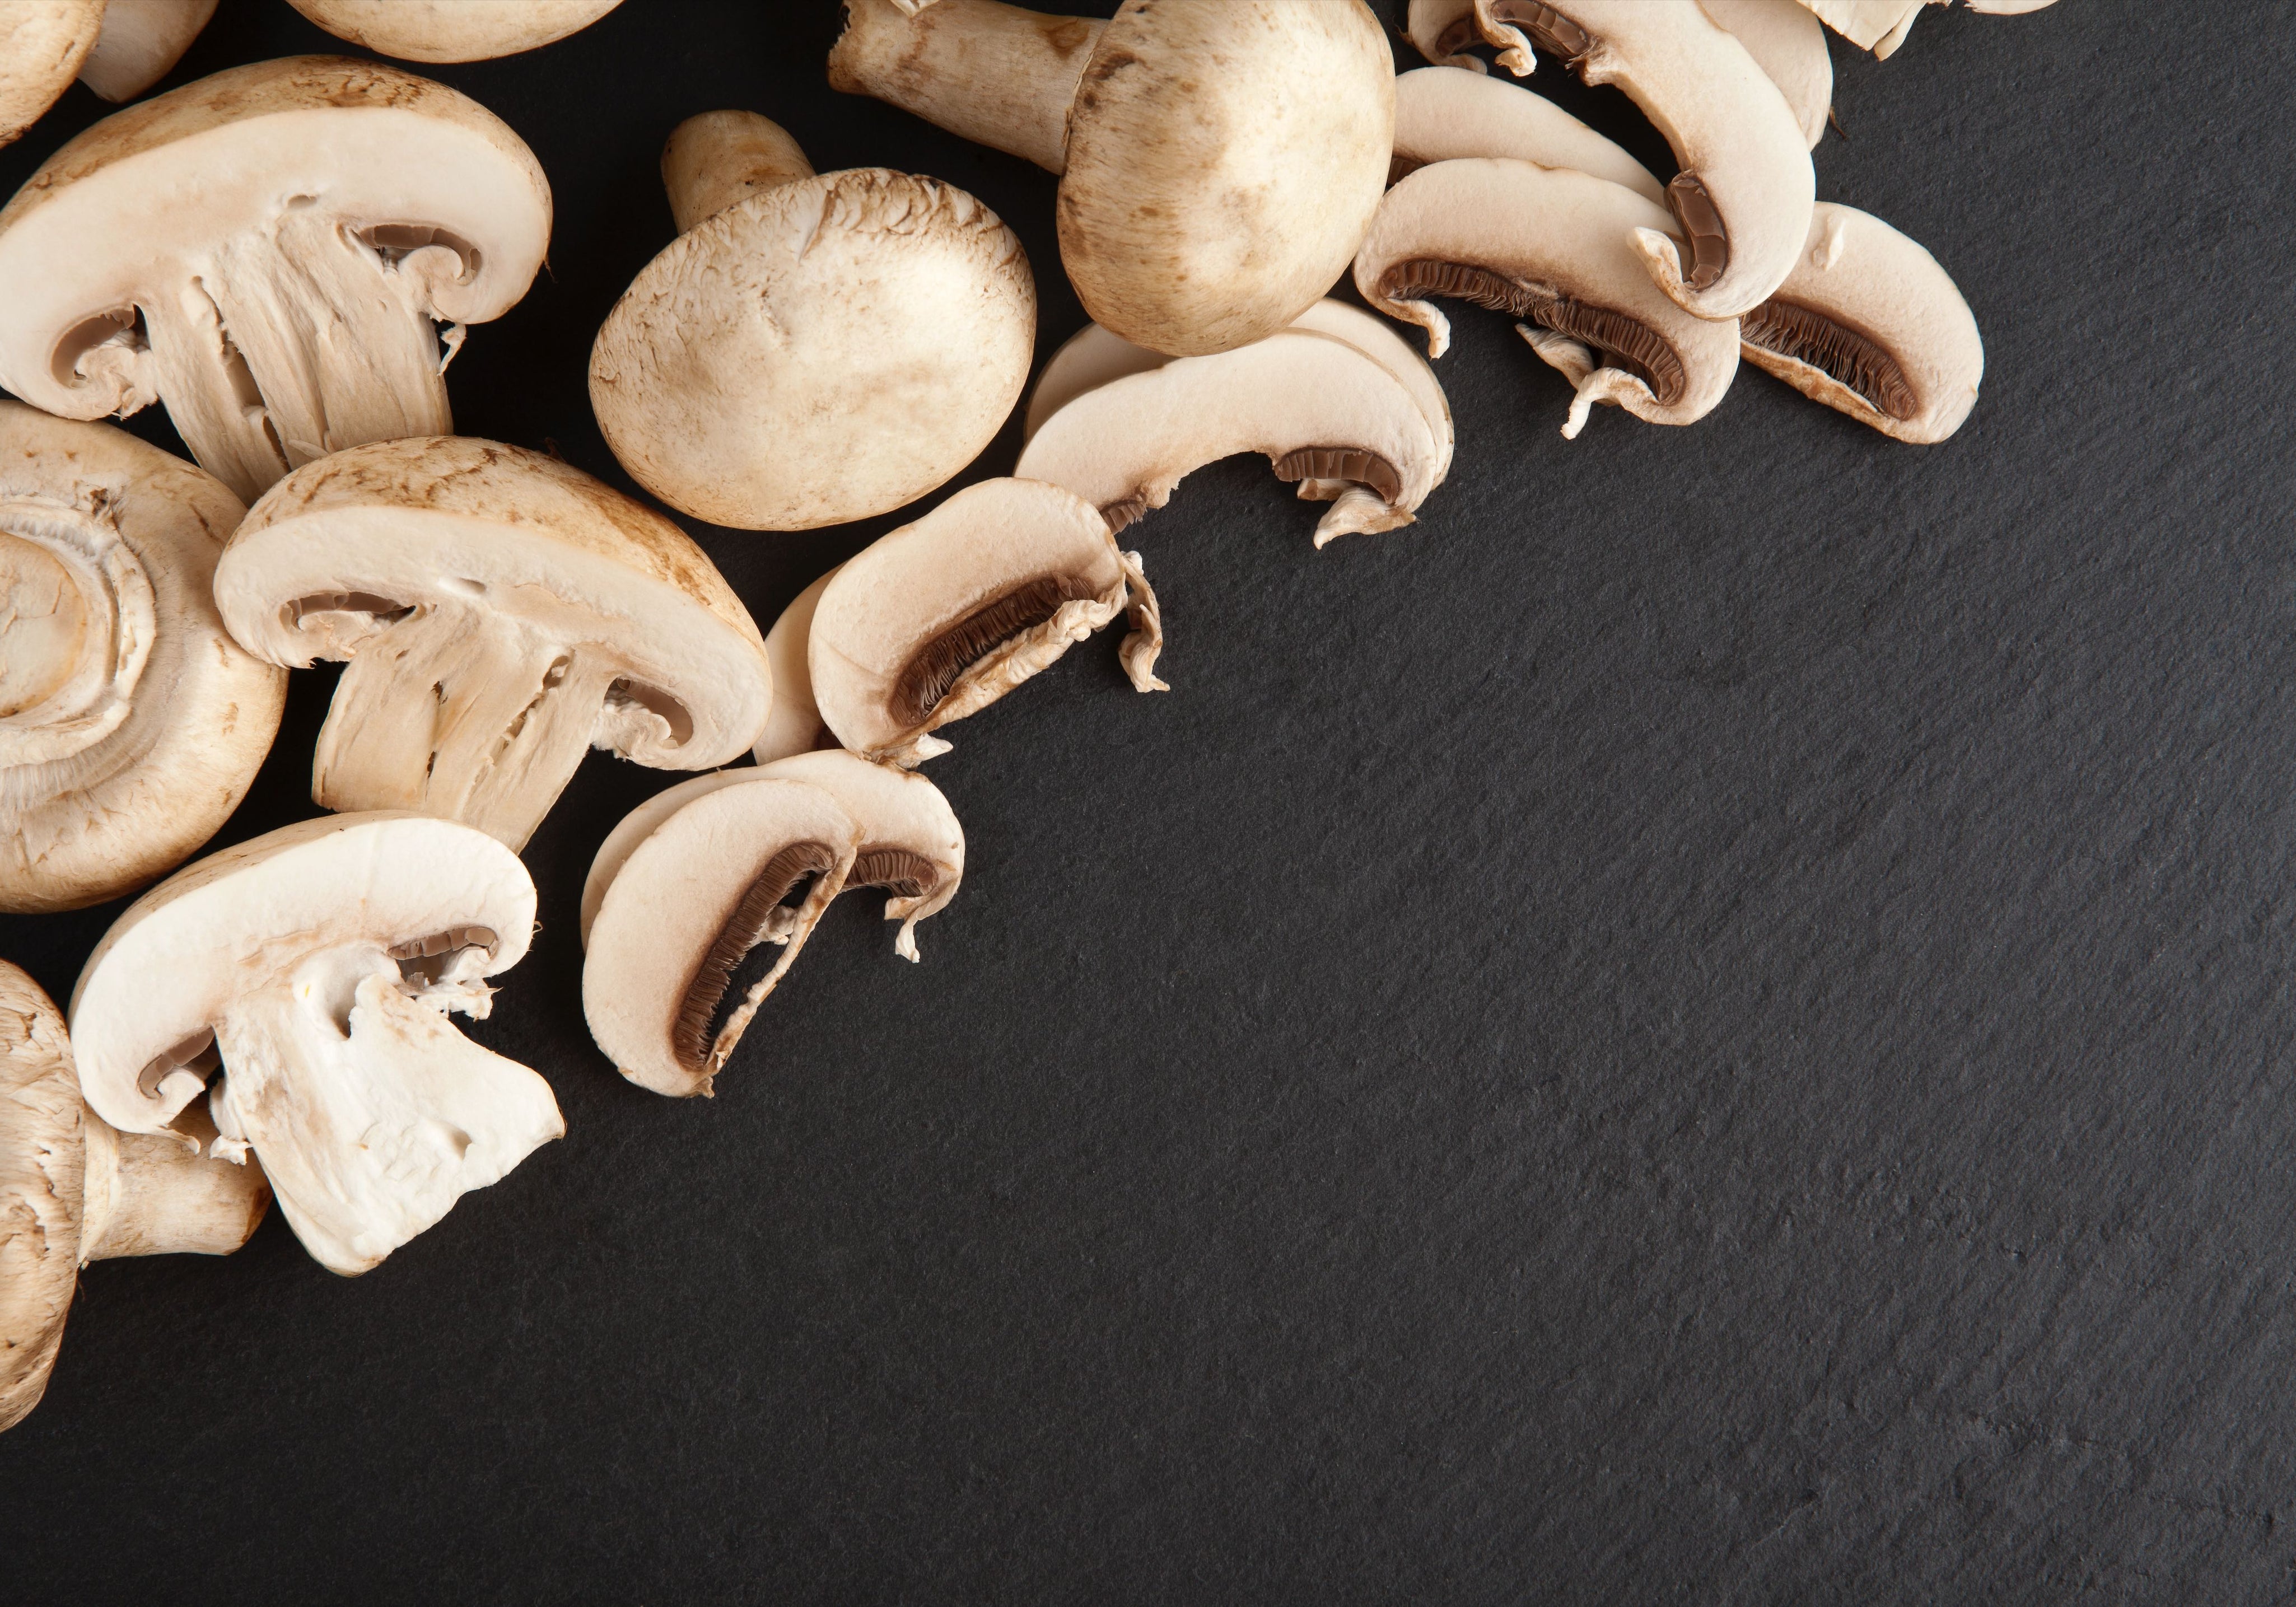 How To Clean Mushrooms: Step-by-Step